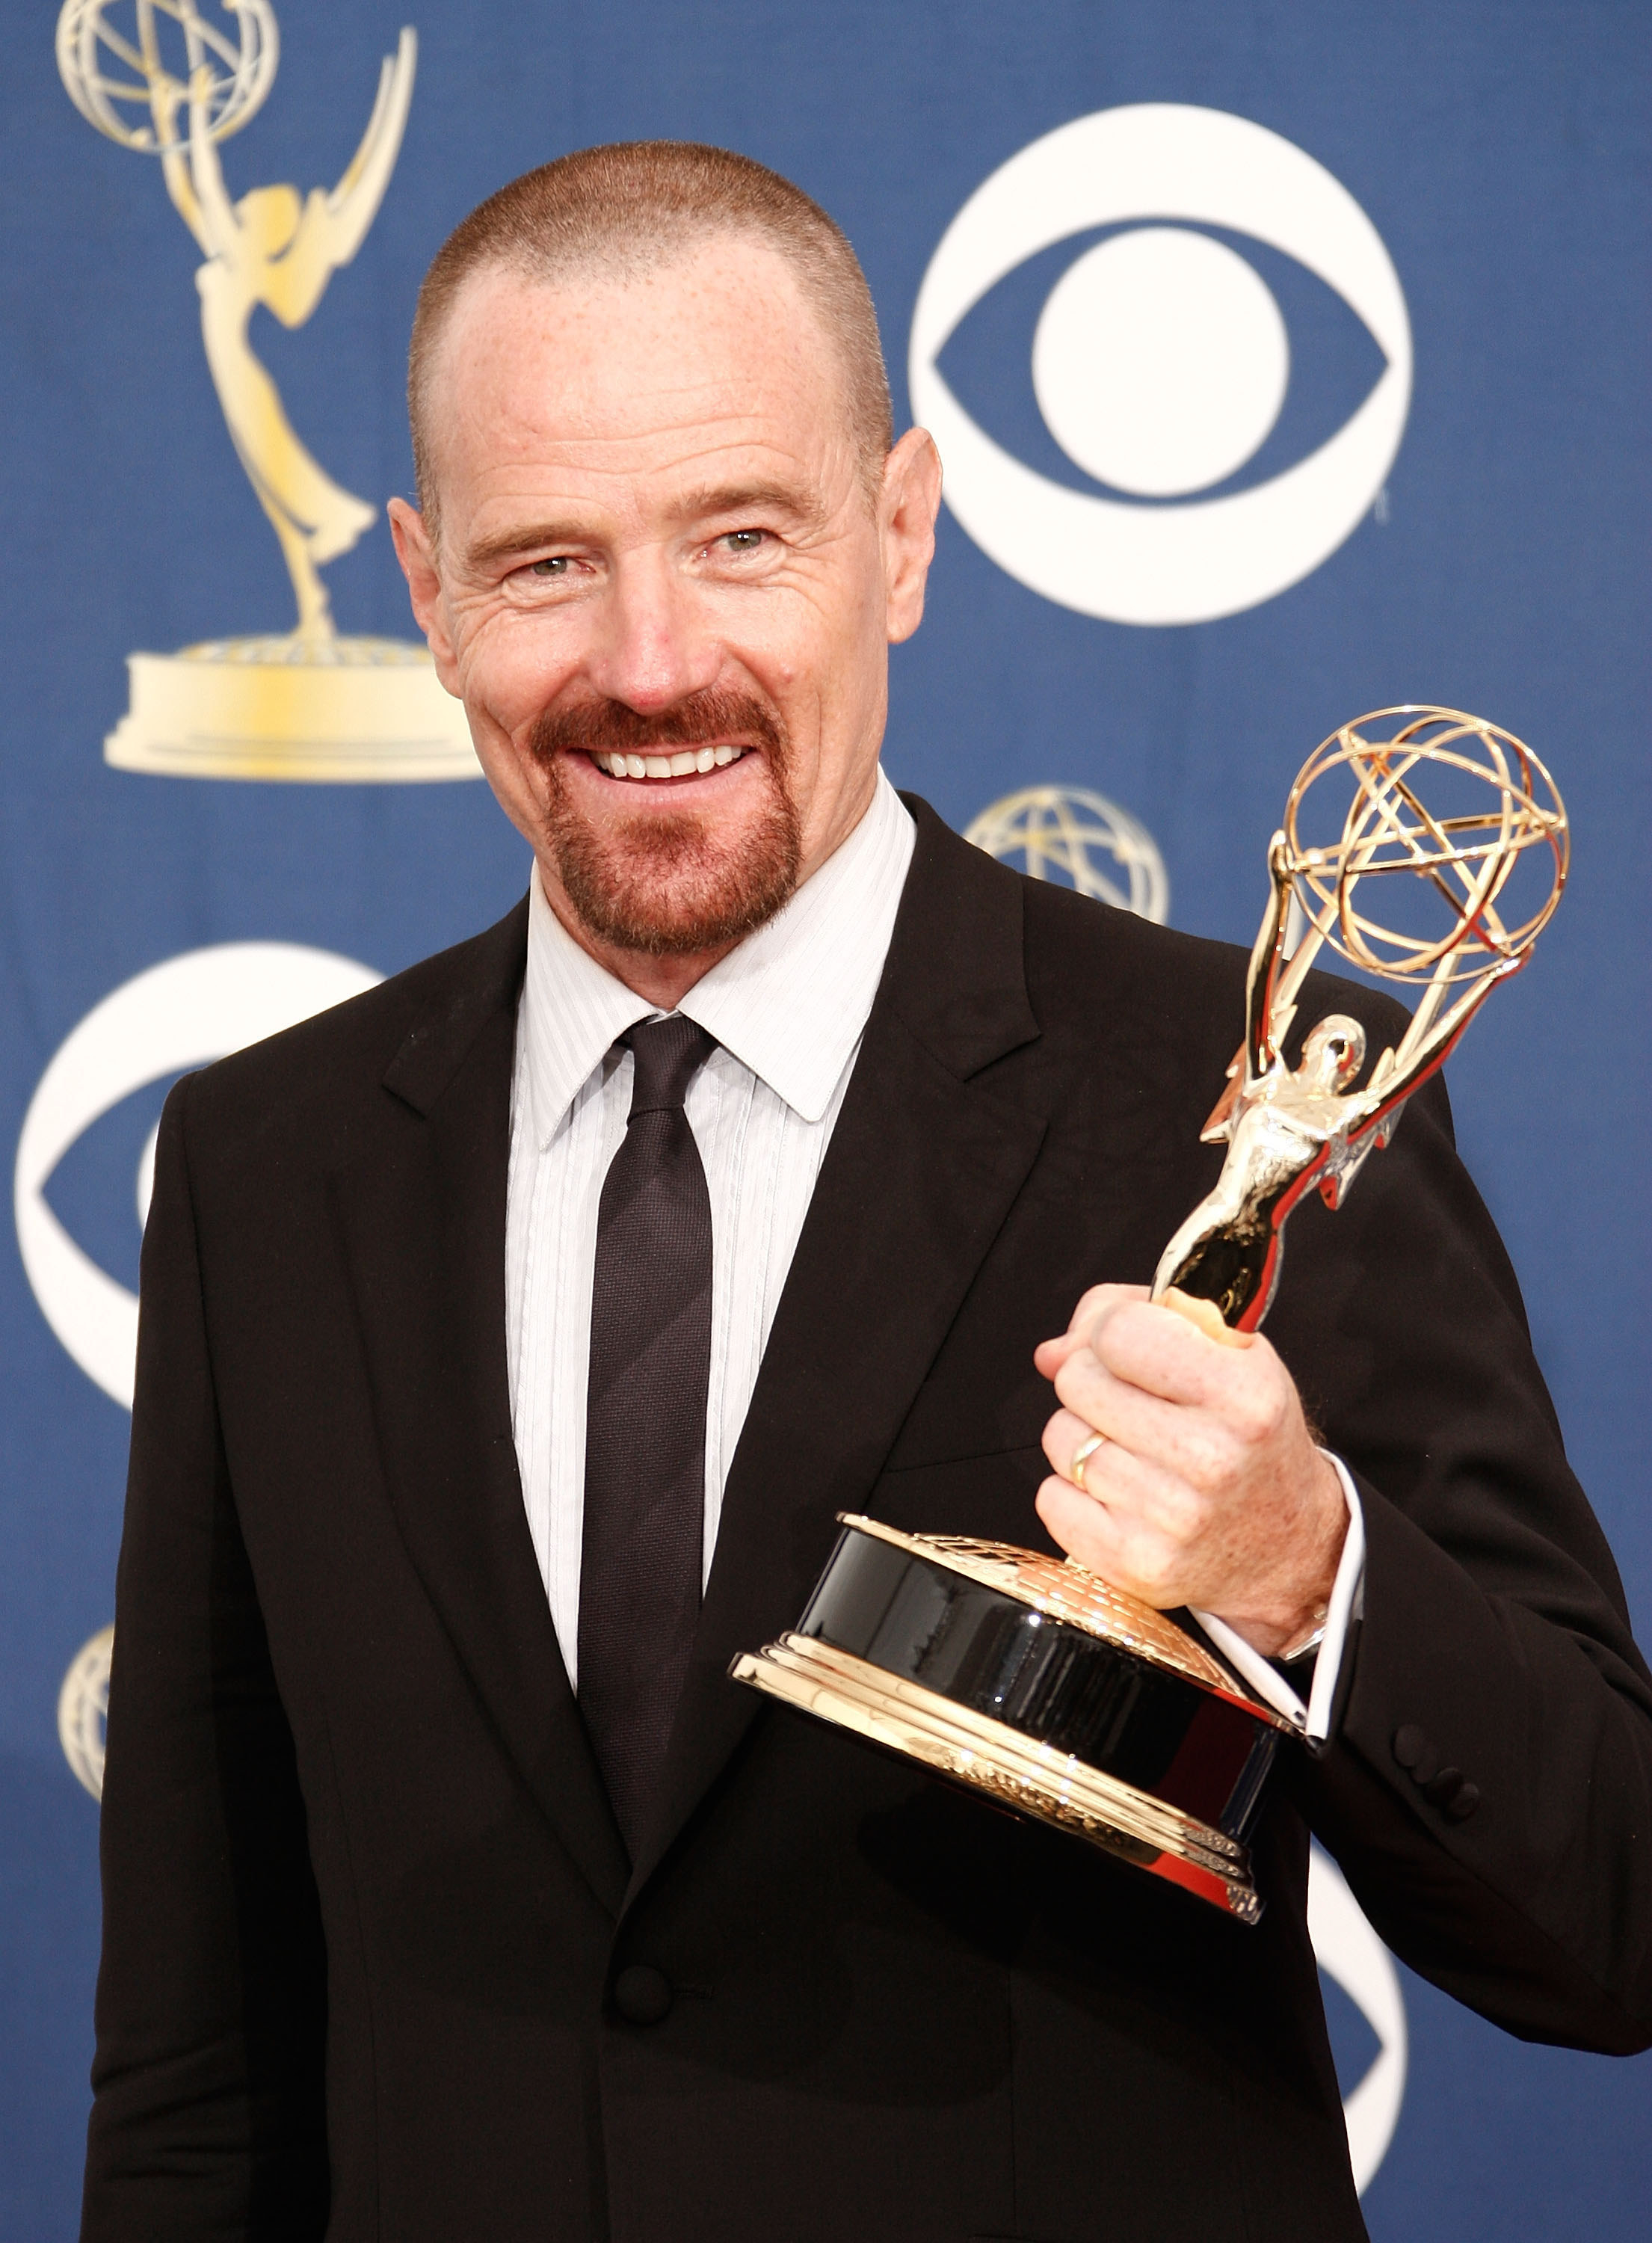 Bryan Cranston with his Emmy Award for Breaking Bad